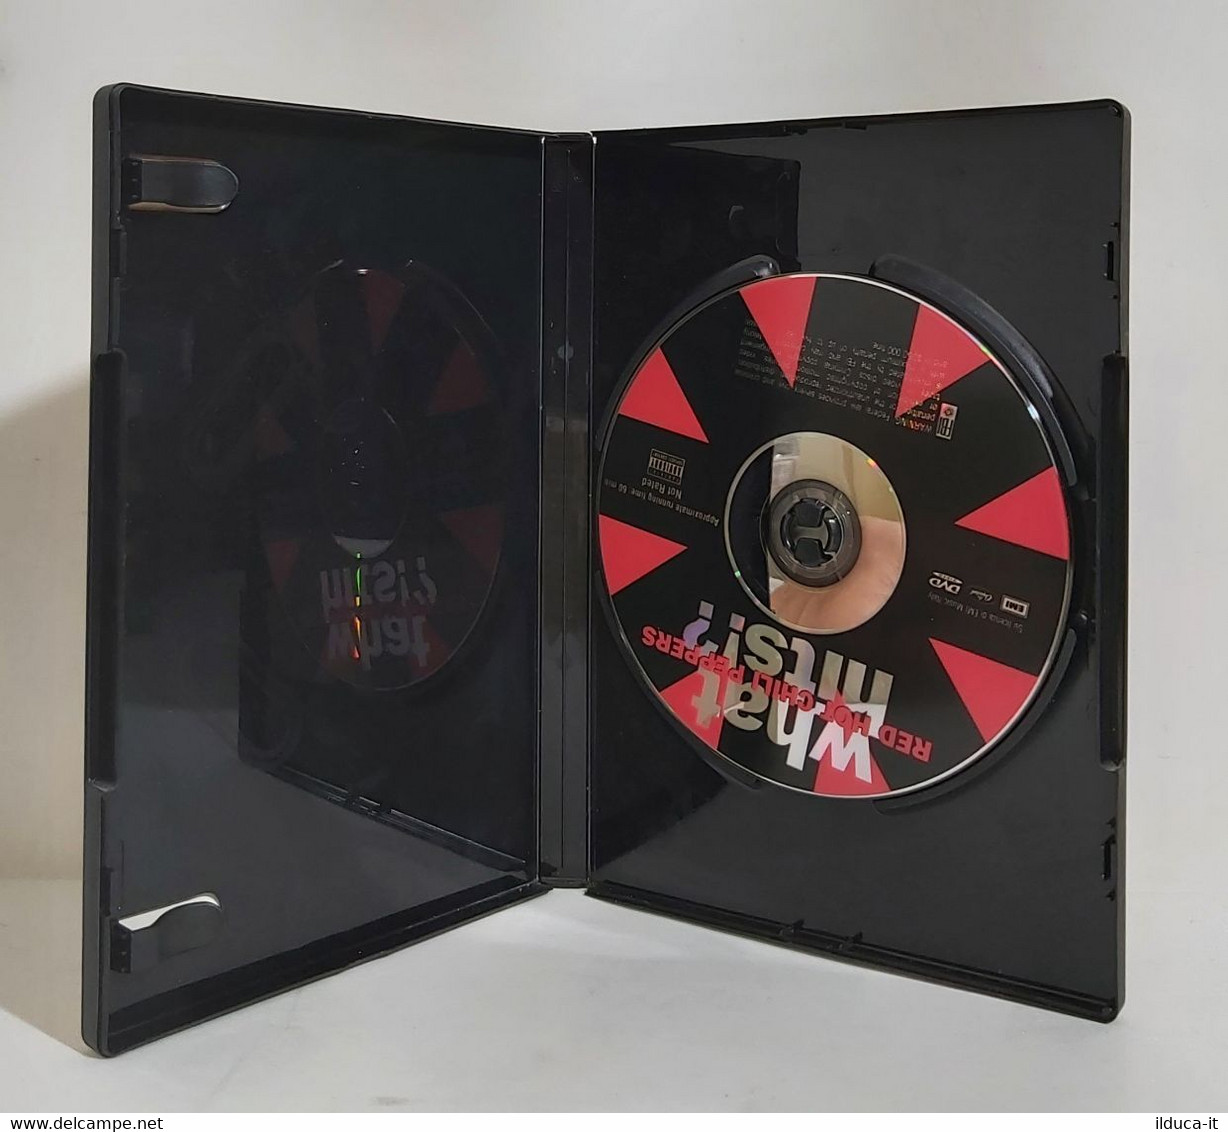 I101842 DVD - RED HOT CHILI PEPPERS - What Hits!? - EMI 2002 - Concert & Music